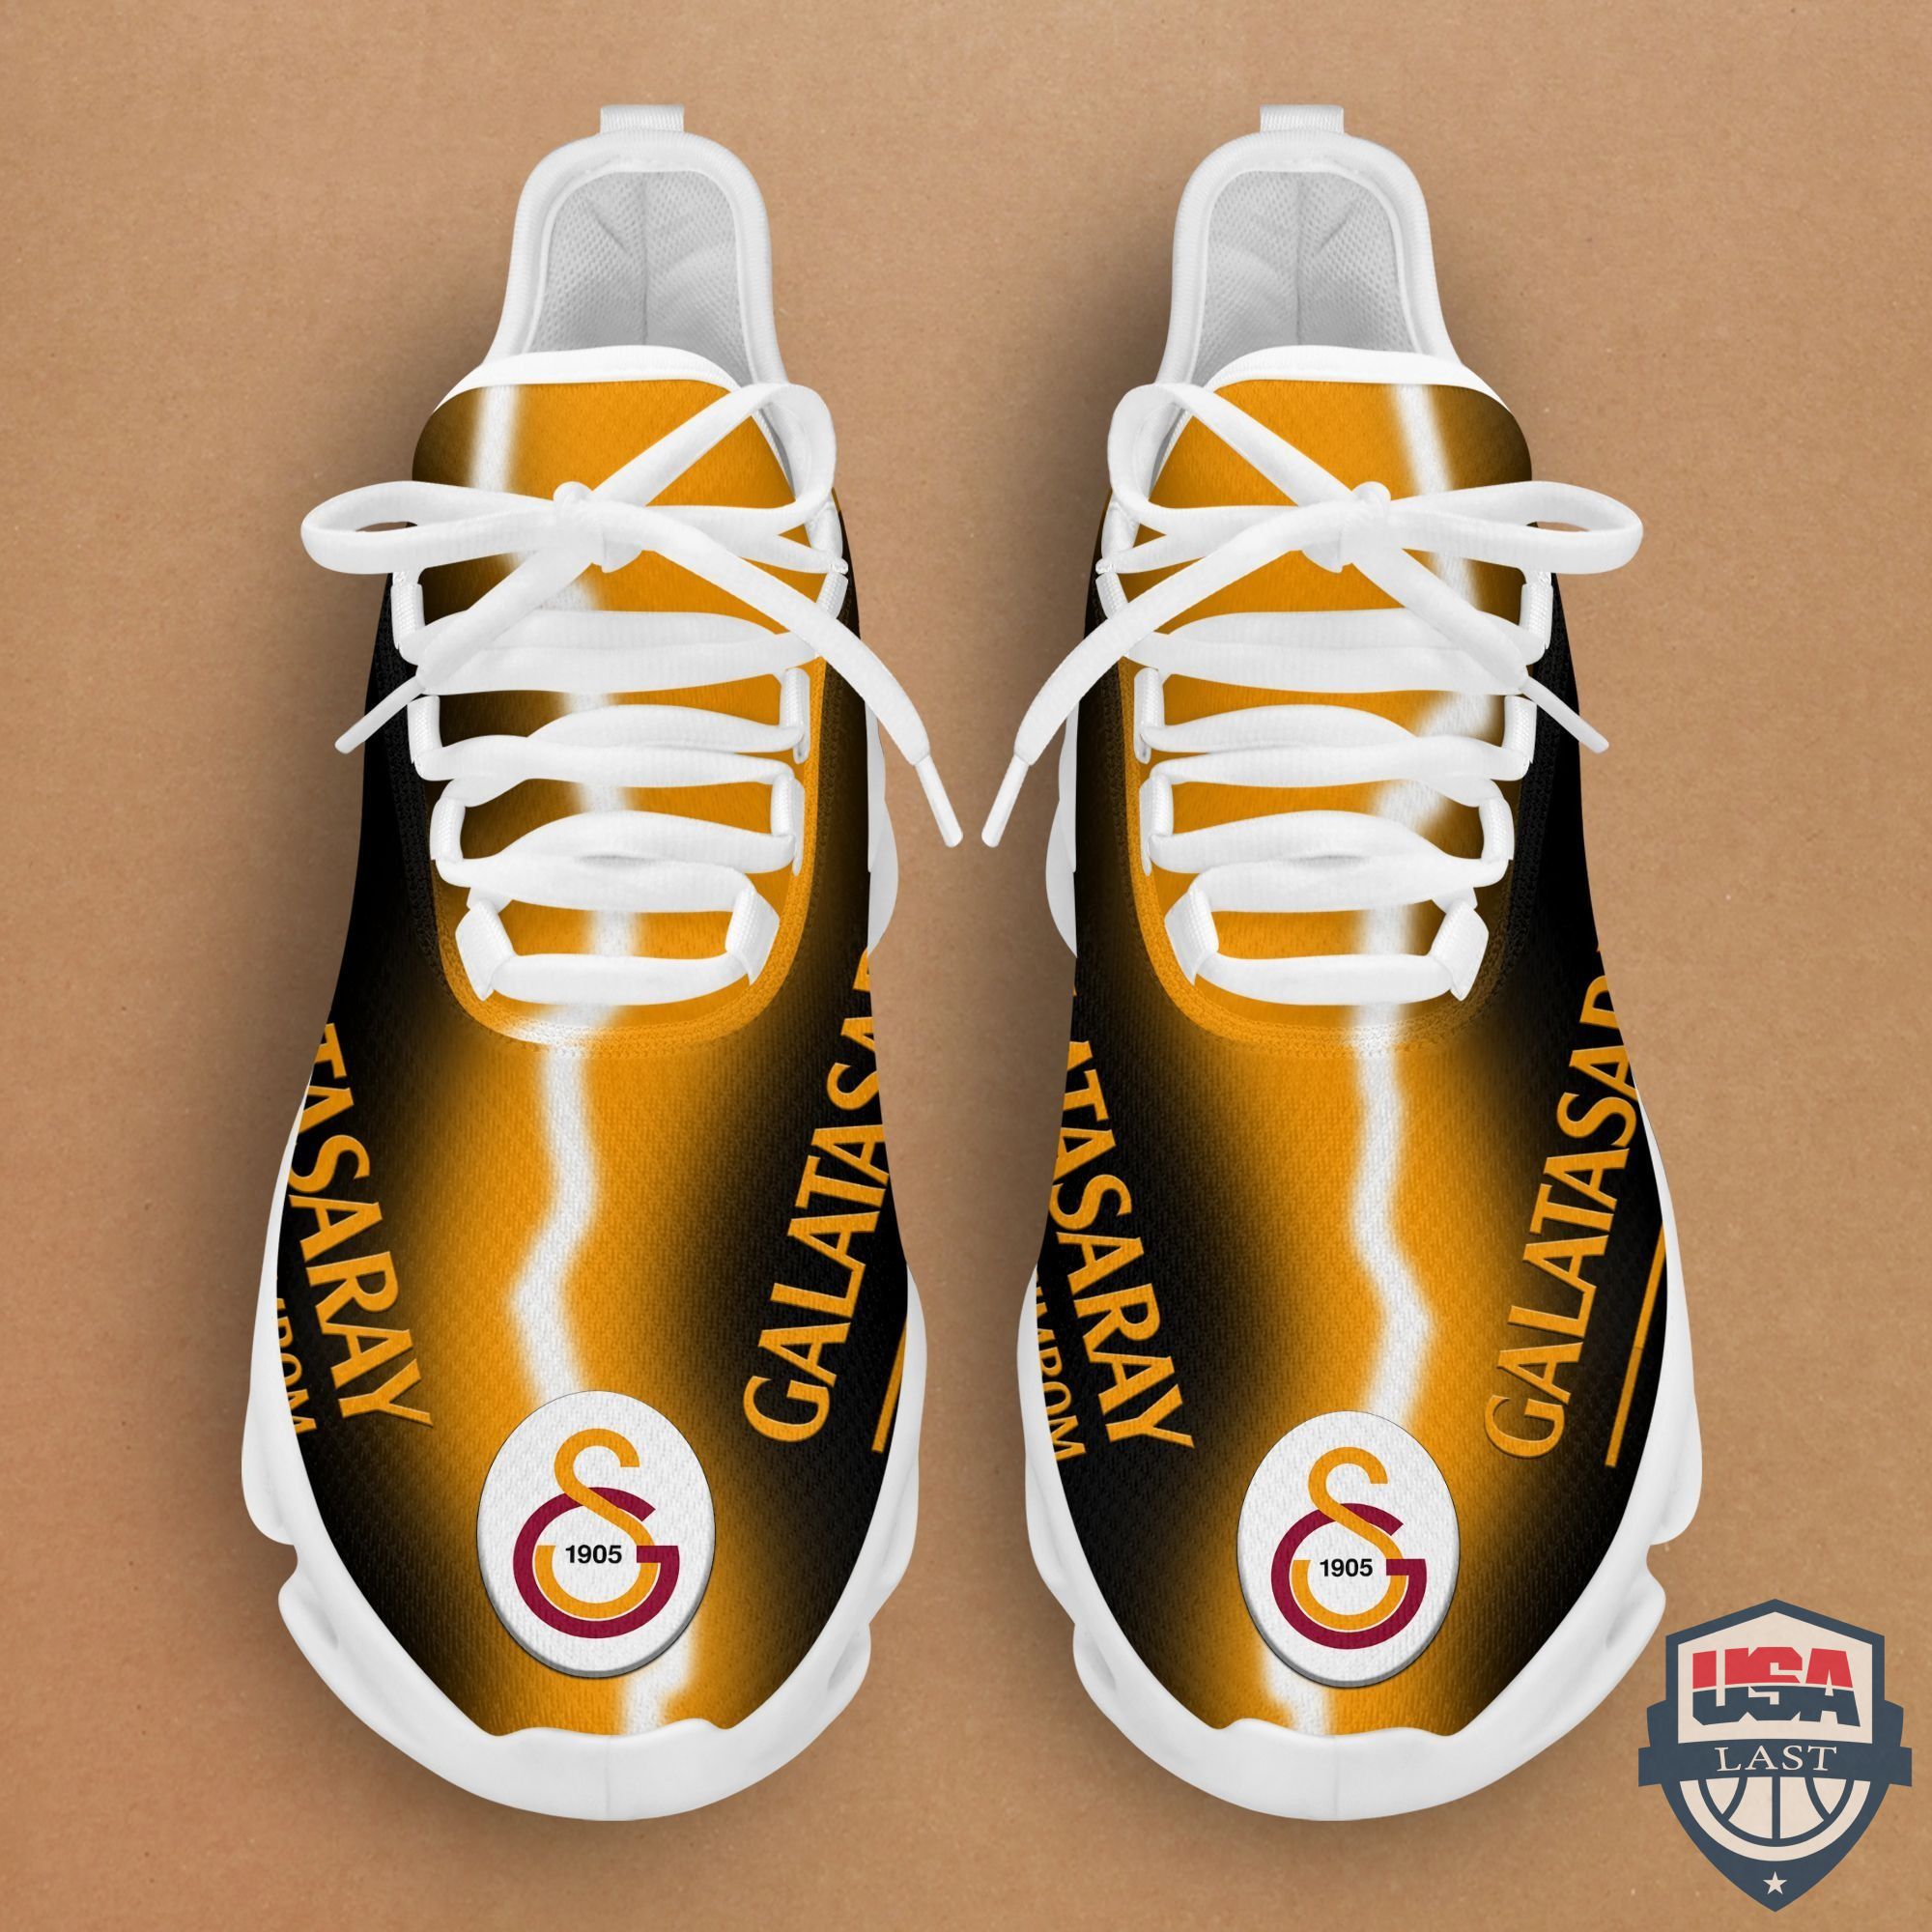 Top Trending – Galatasaray FC Max Soul Shoes Brass Version